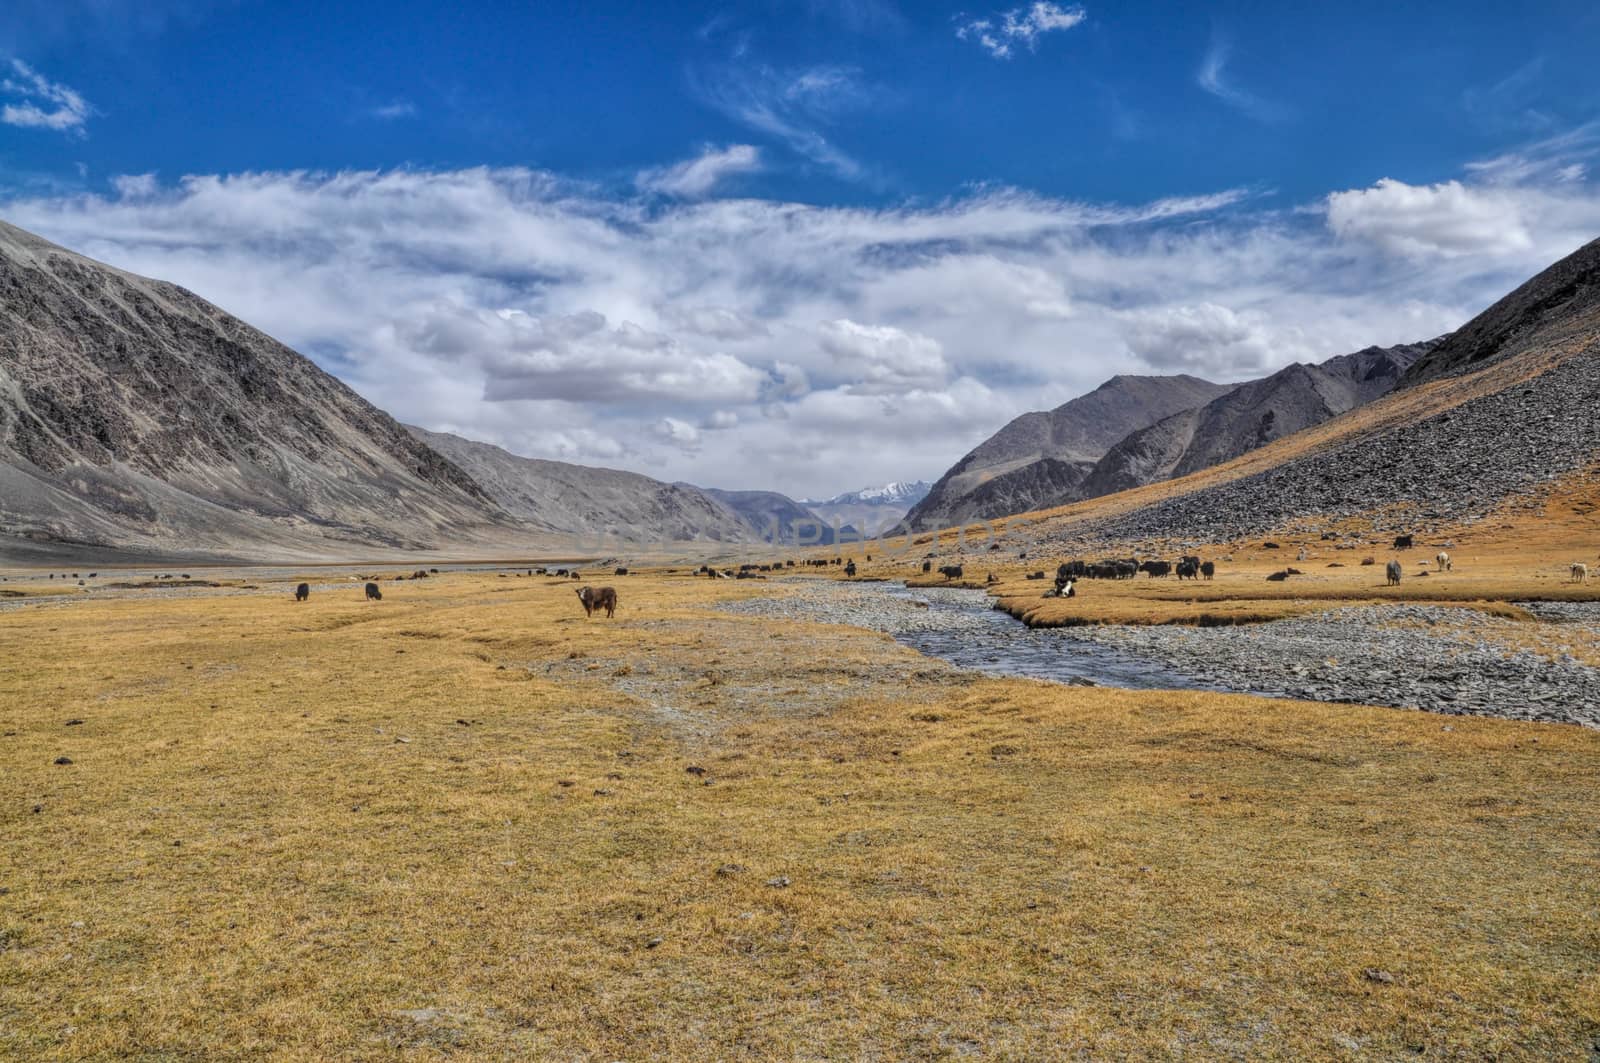 Herd of yaks by the river in Pamir mountains in Tajikistan